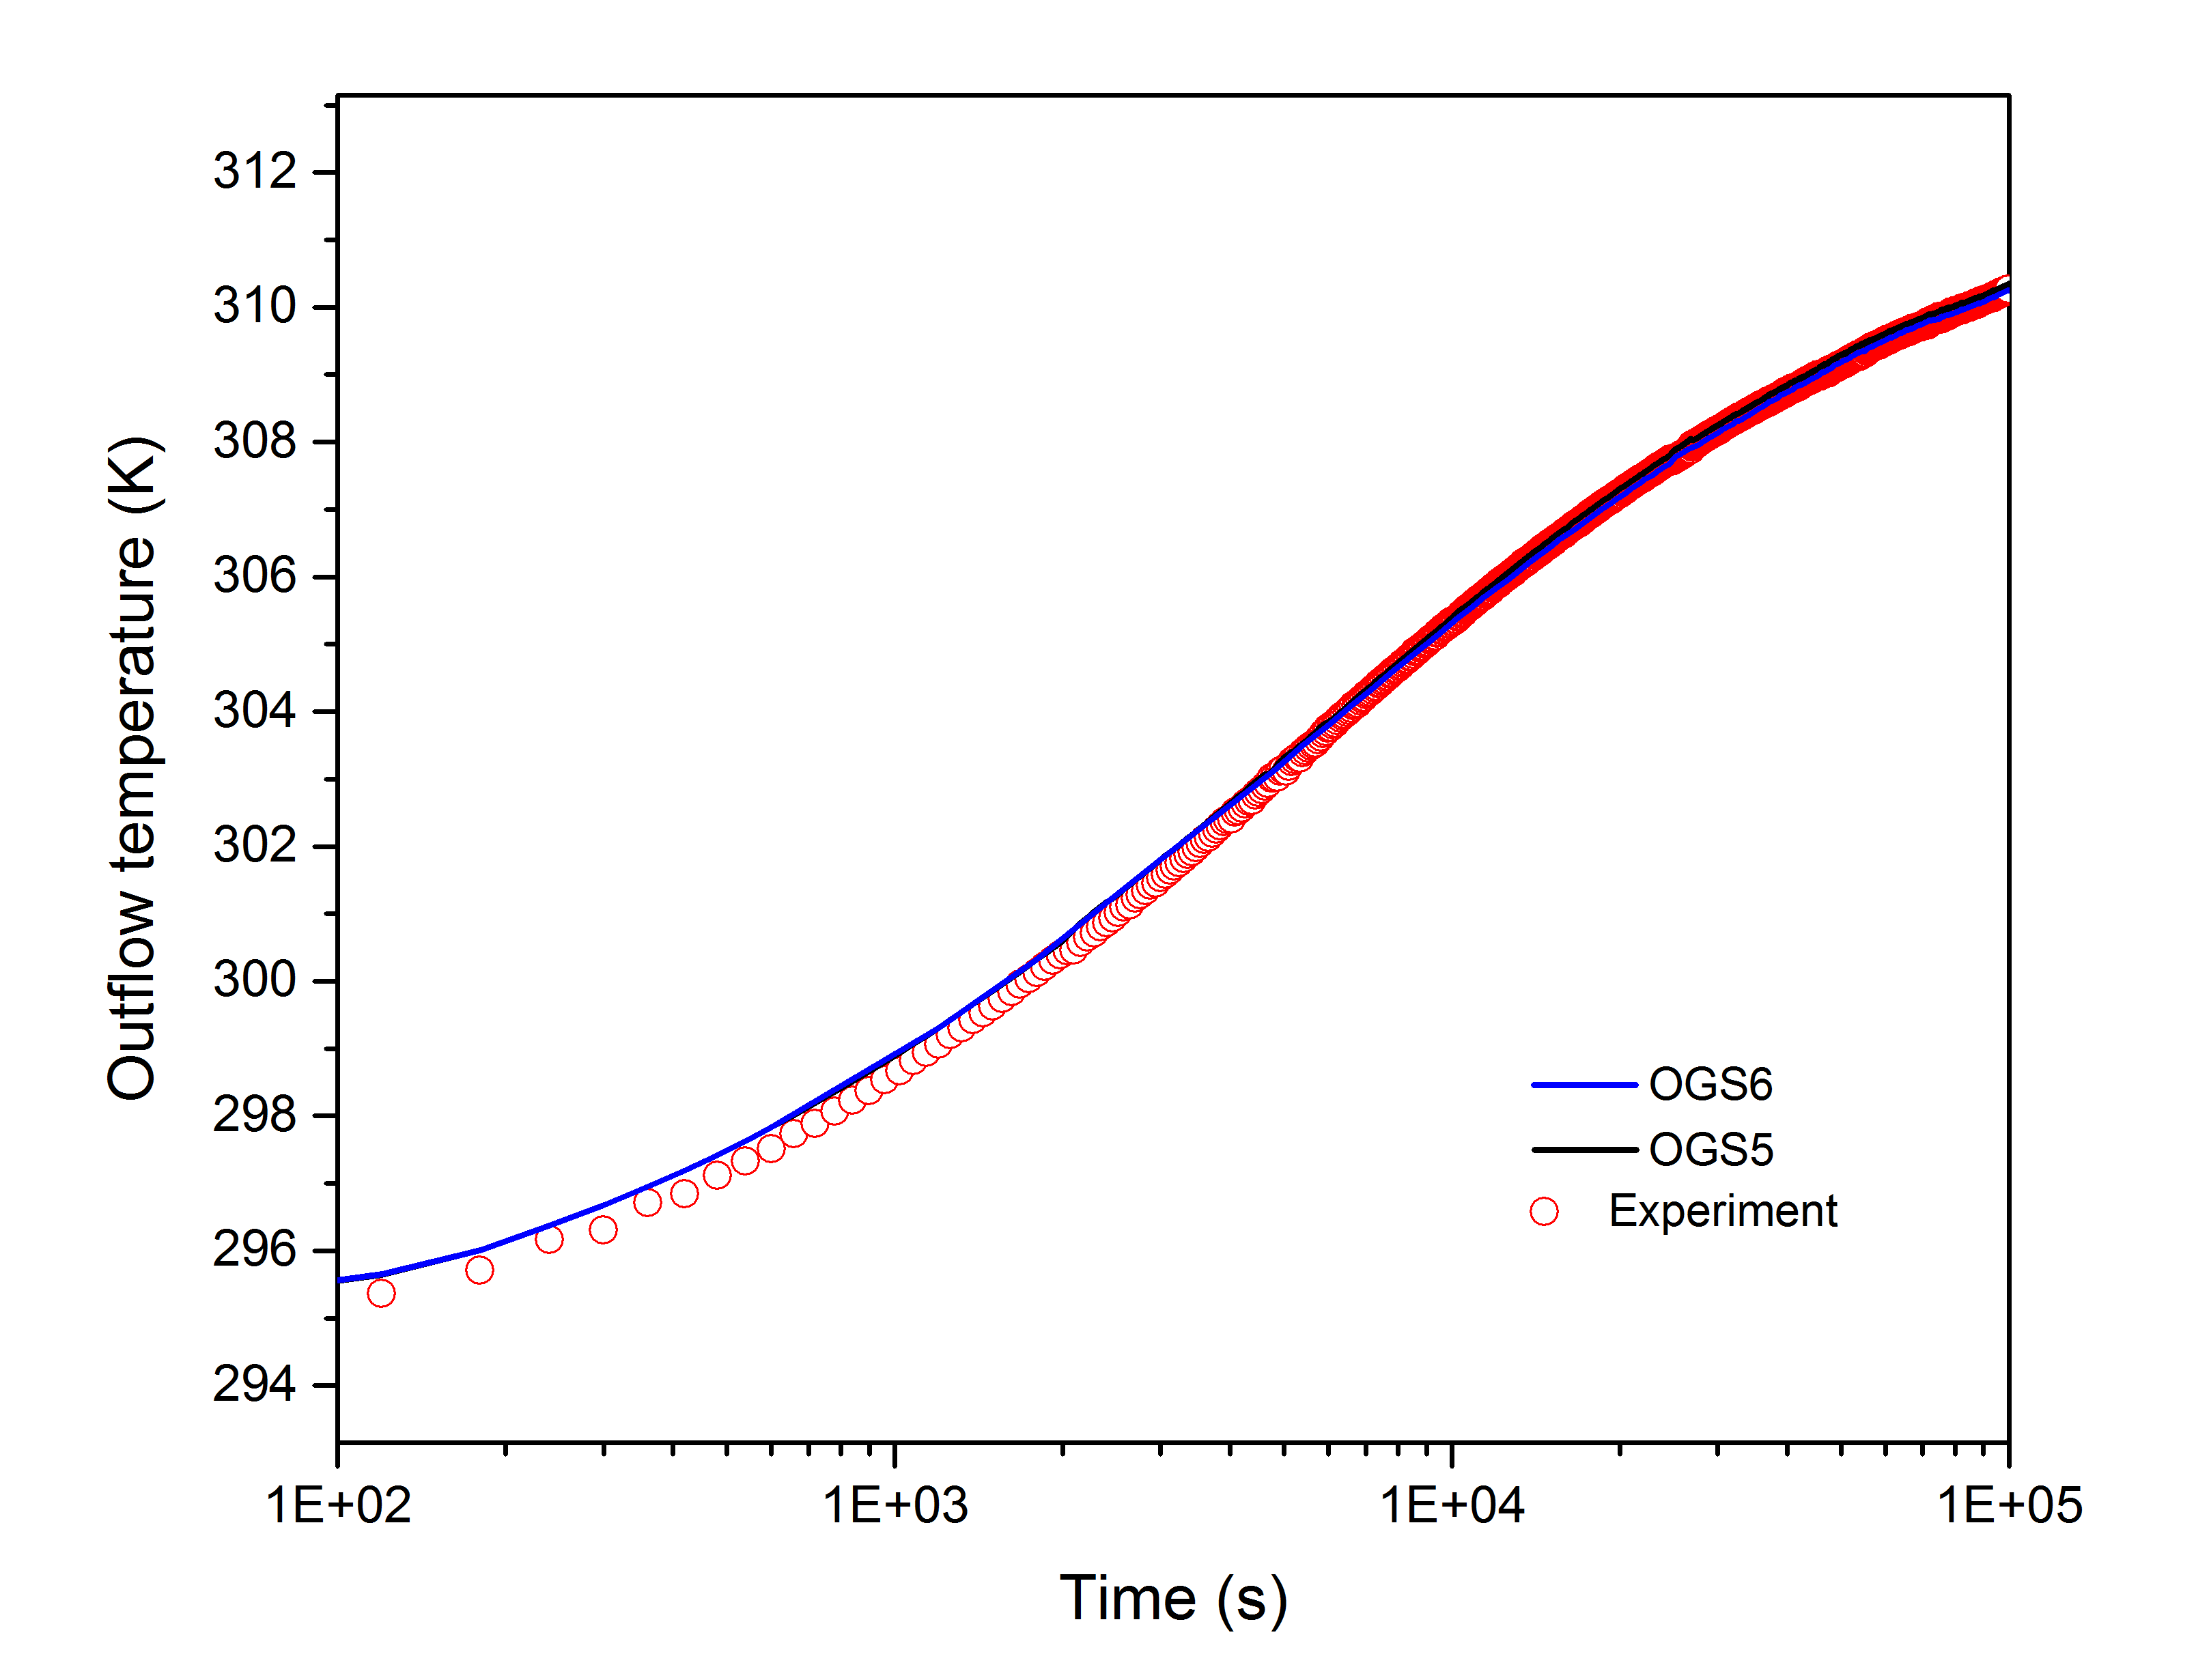 Comparison with experiment and OGS-5 results regarding outflow temperature of the BHE